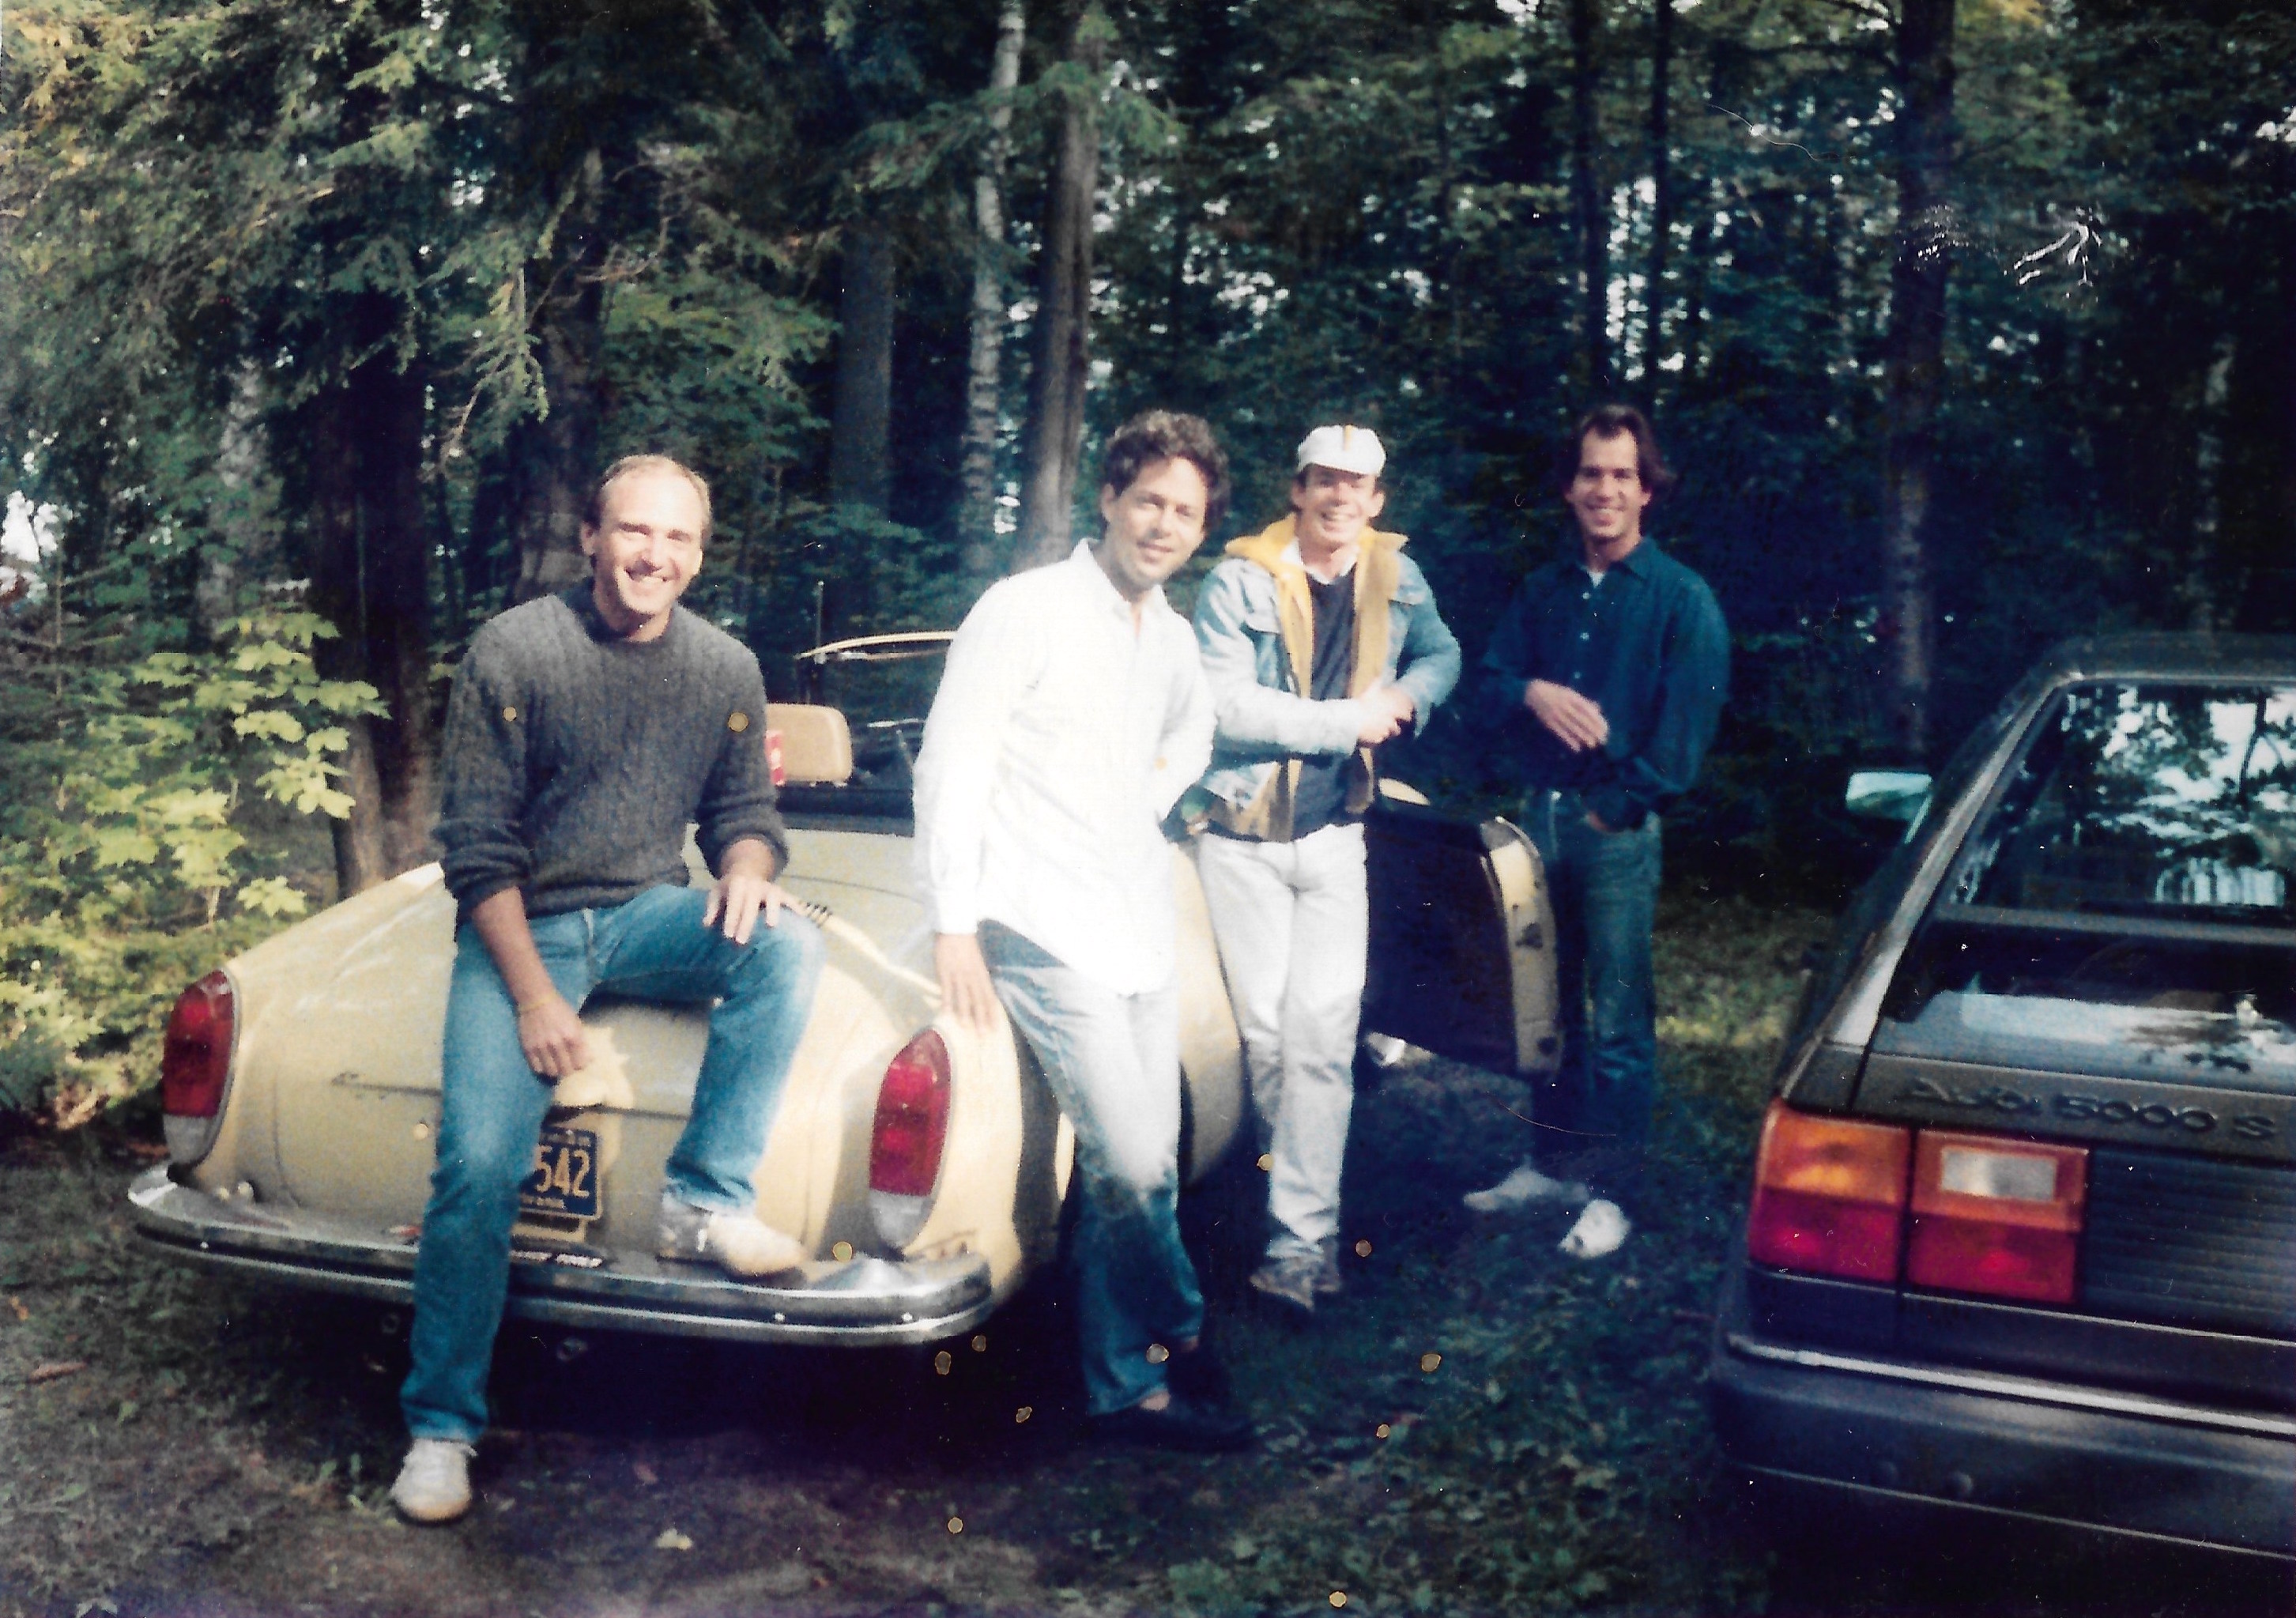 Rags (placed second from left) with his then partner (placed on the far right) and their friends before the AIDS crisis, Lake of Bays, Ontario, CA.